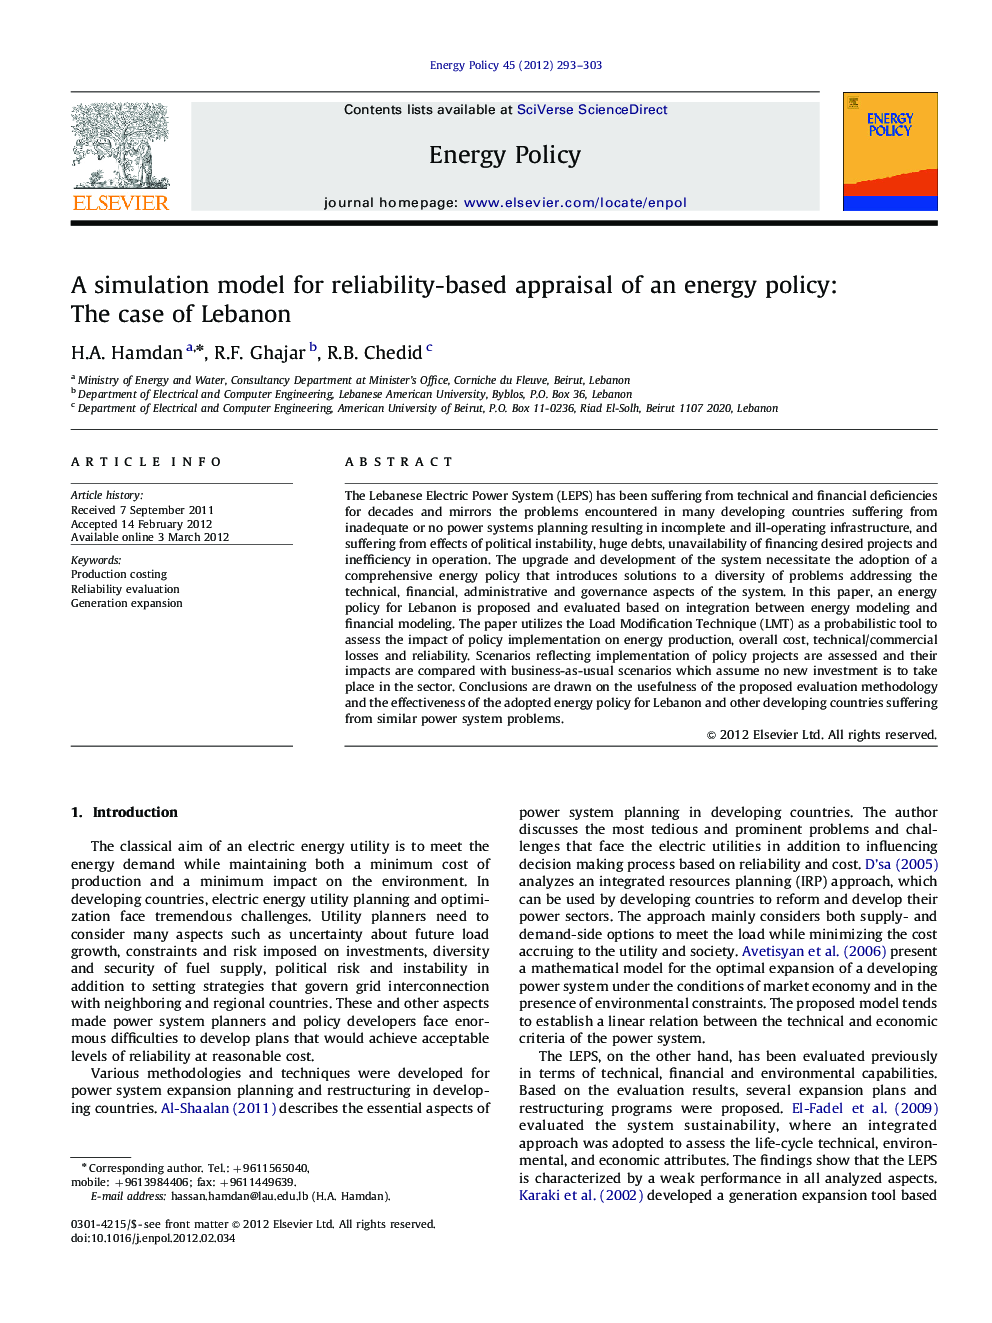 A simulation model for reliability-based appraisal of an energy policy: The case of Lebanon